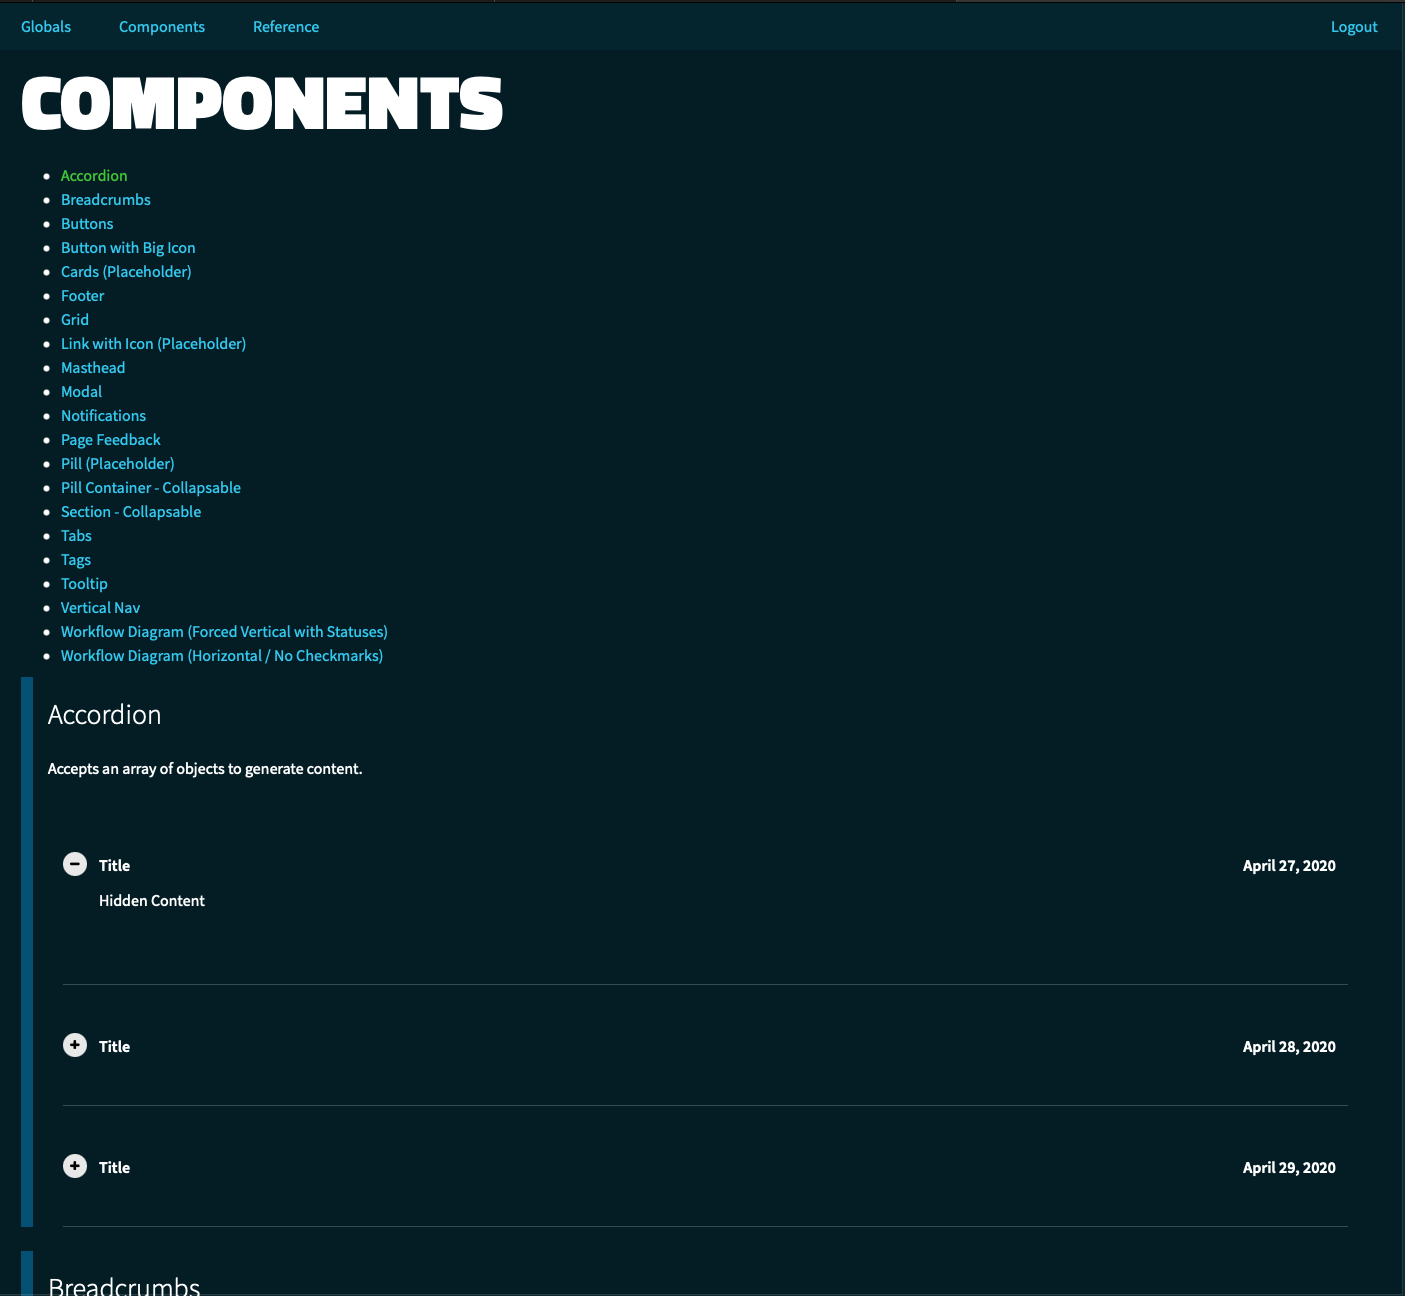 styleguide portal of components I coded